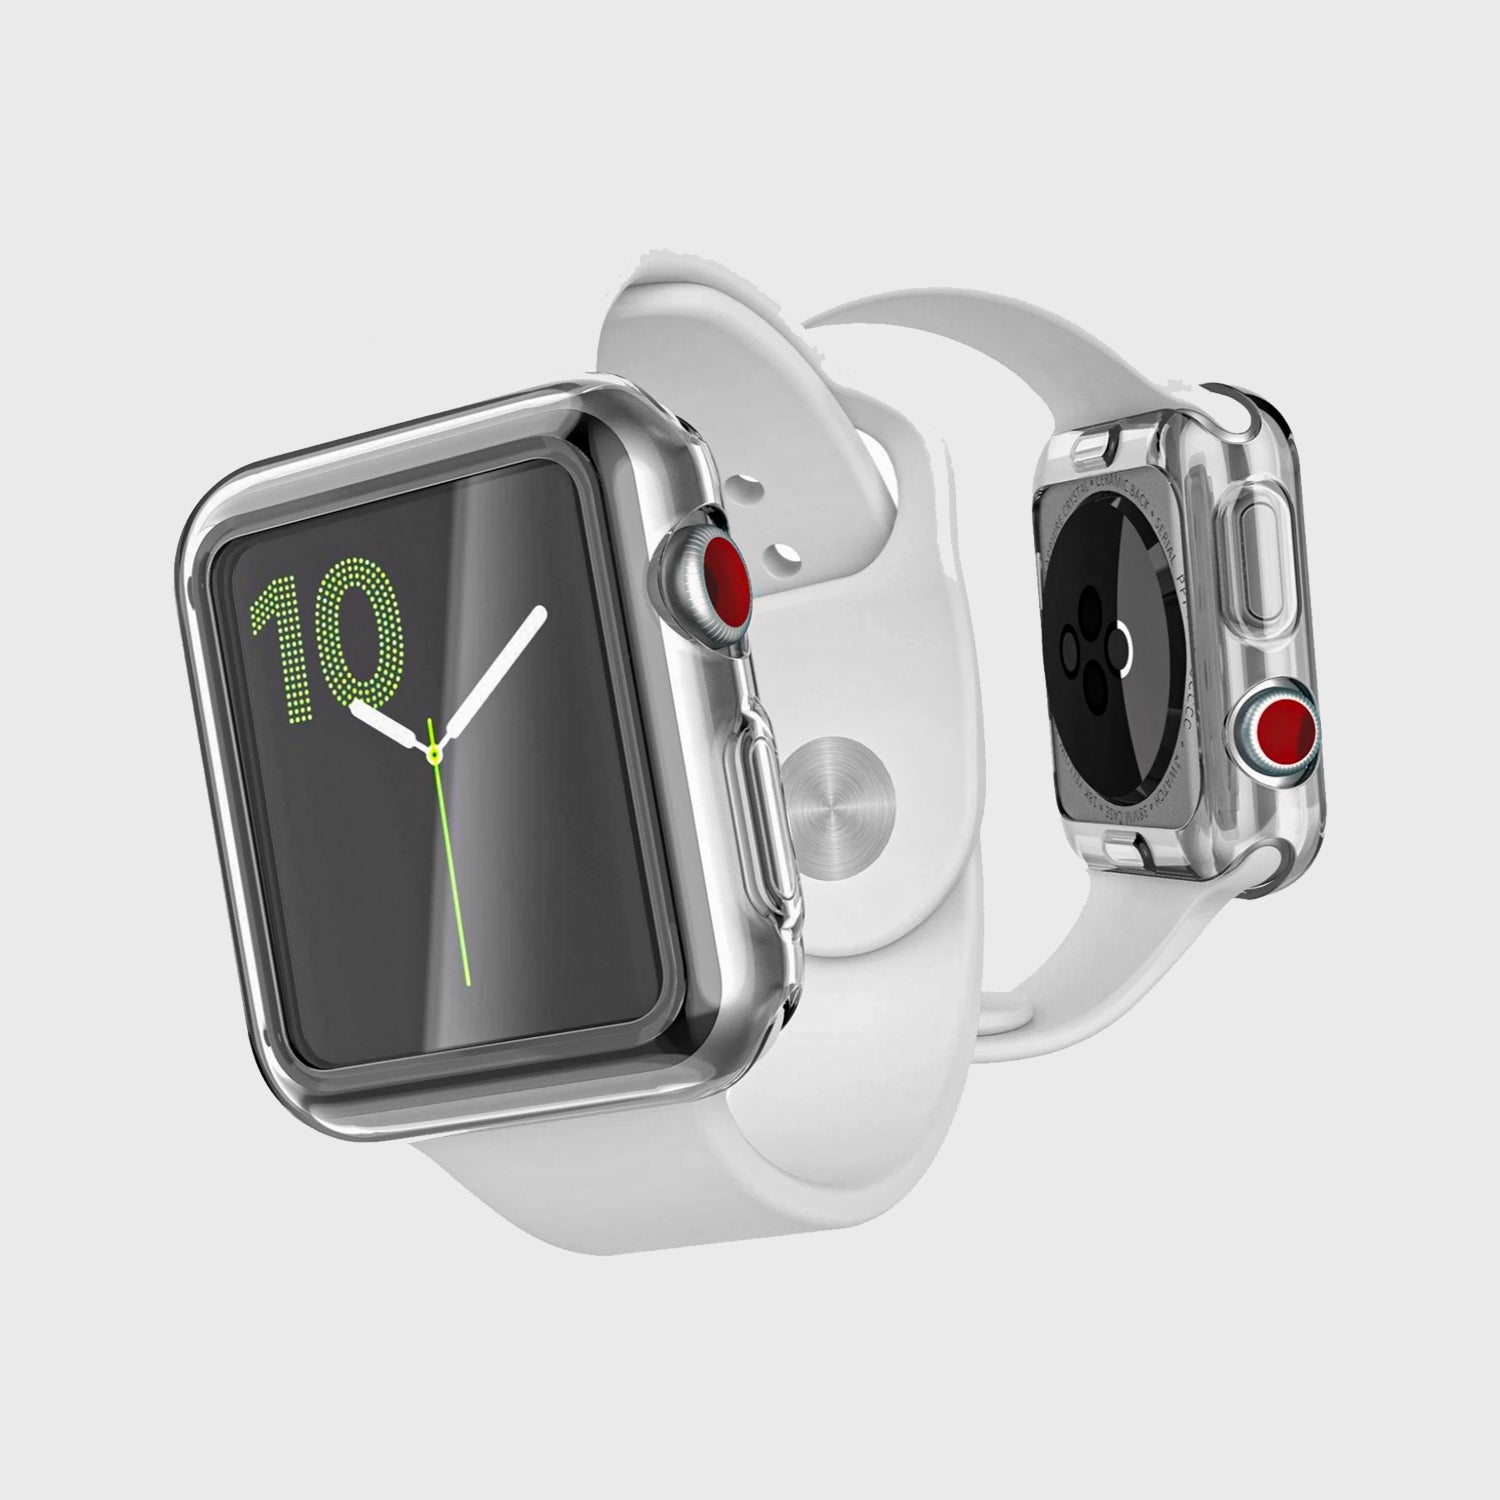 A white X-Doria Apple Watch with a Hybrid glass screen protector.